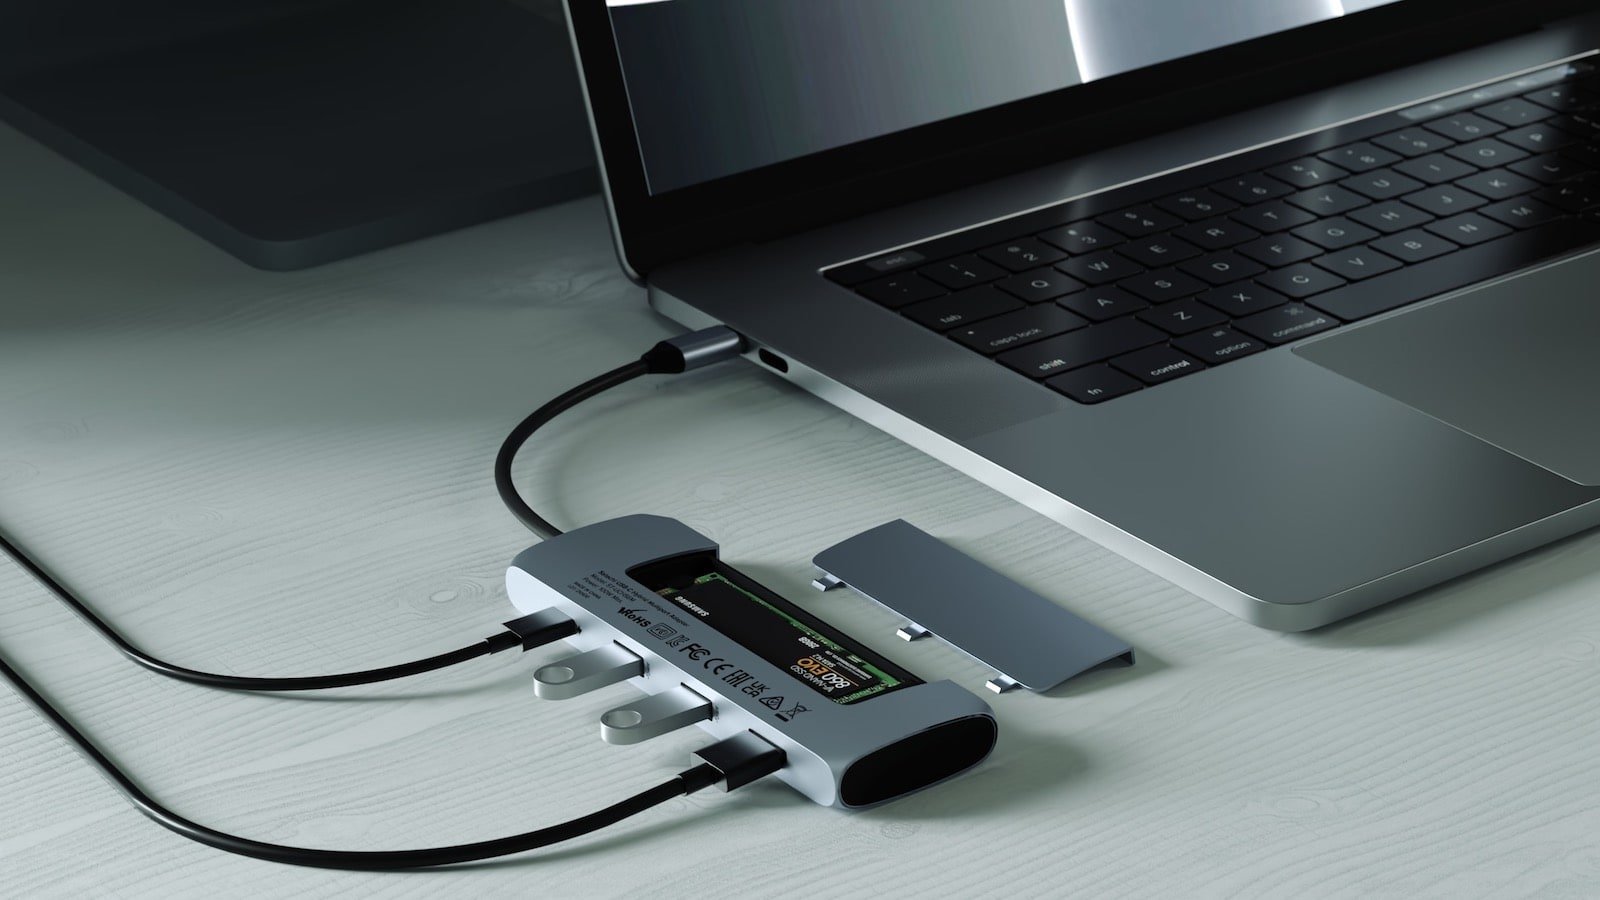 Satechi USB-C Hybrid Multiport Adapter features a built-in SSD storage compartment